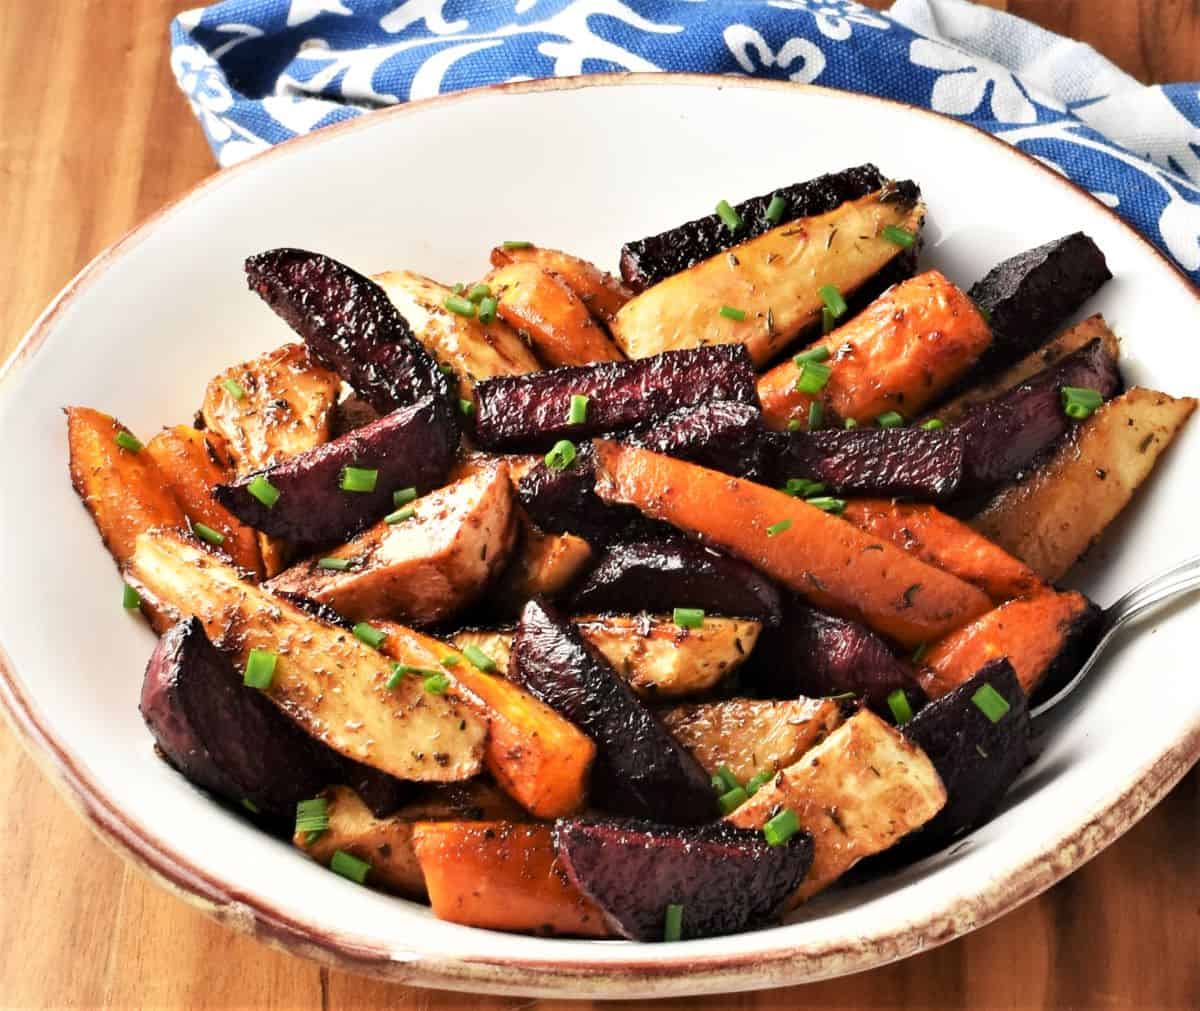 Side view of roasted balsamic vegetables in white bowl.